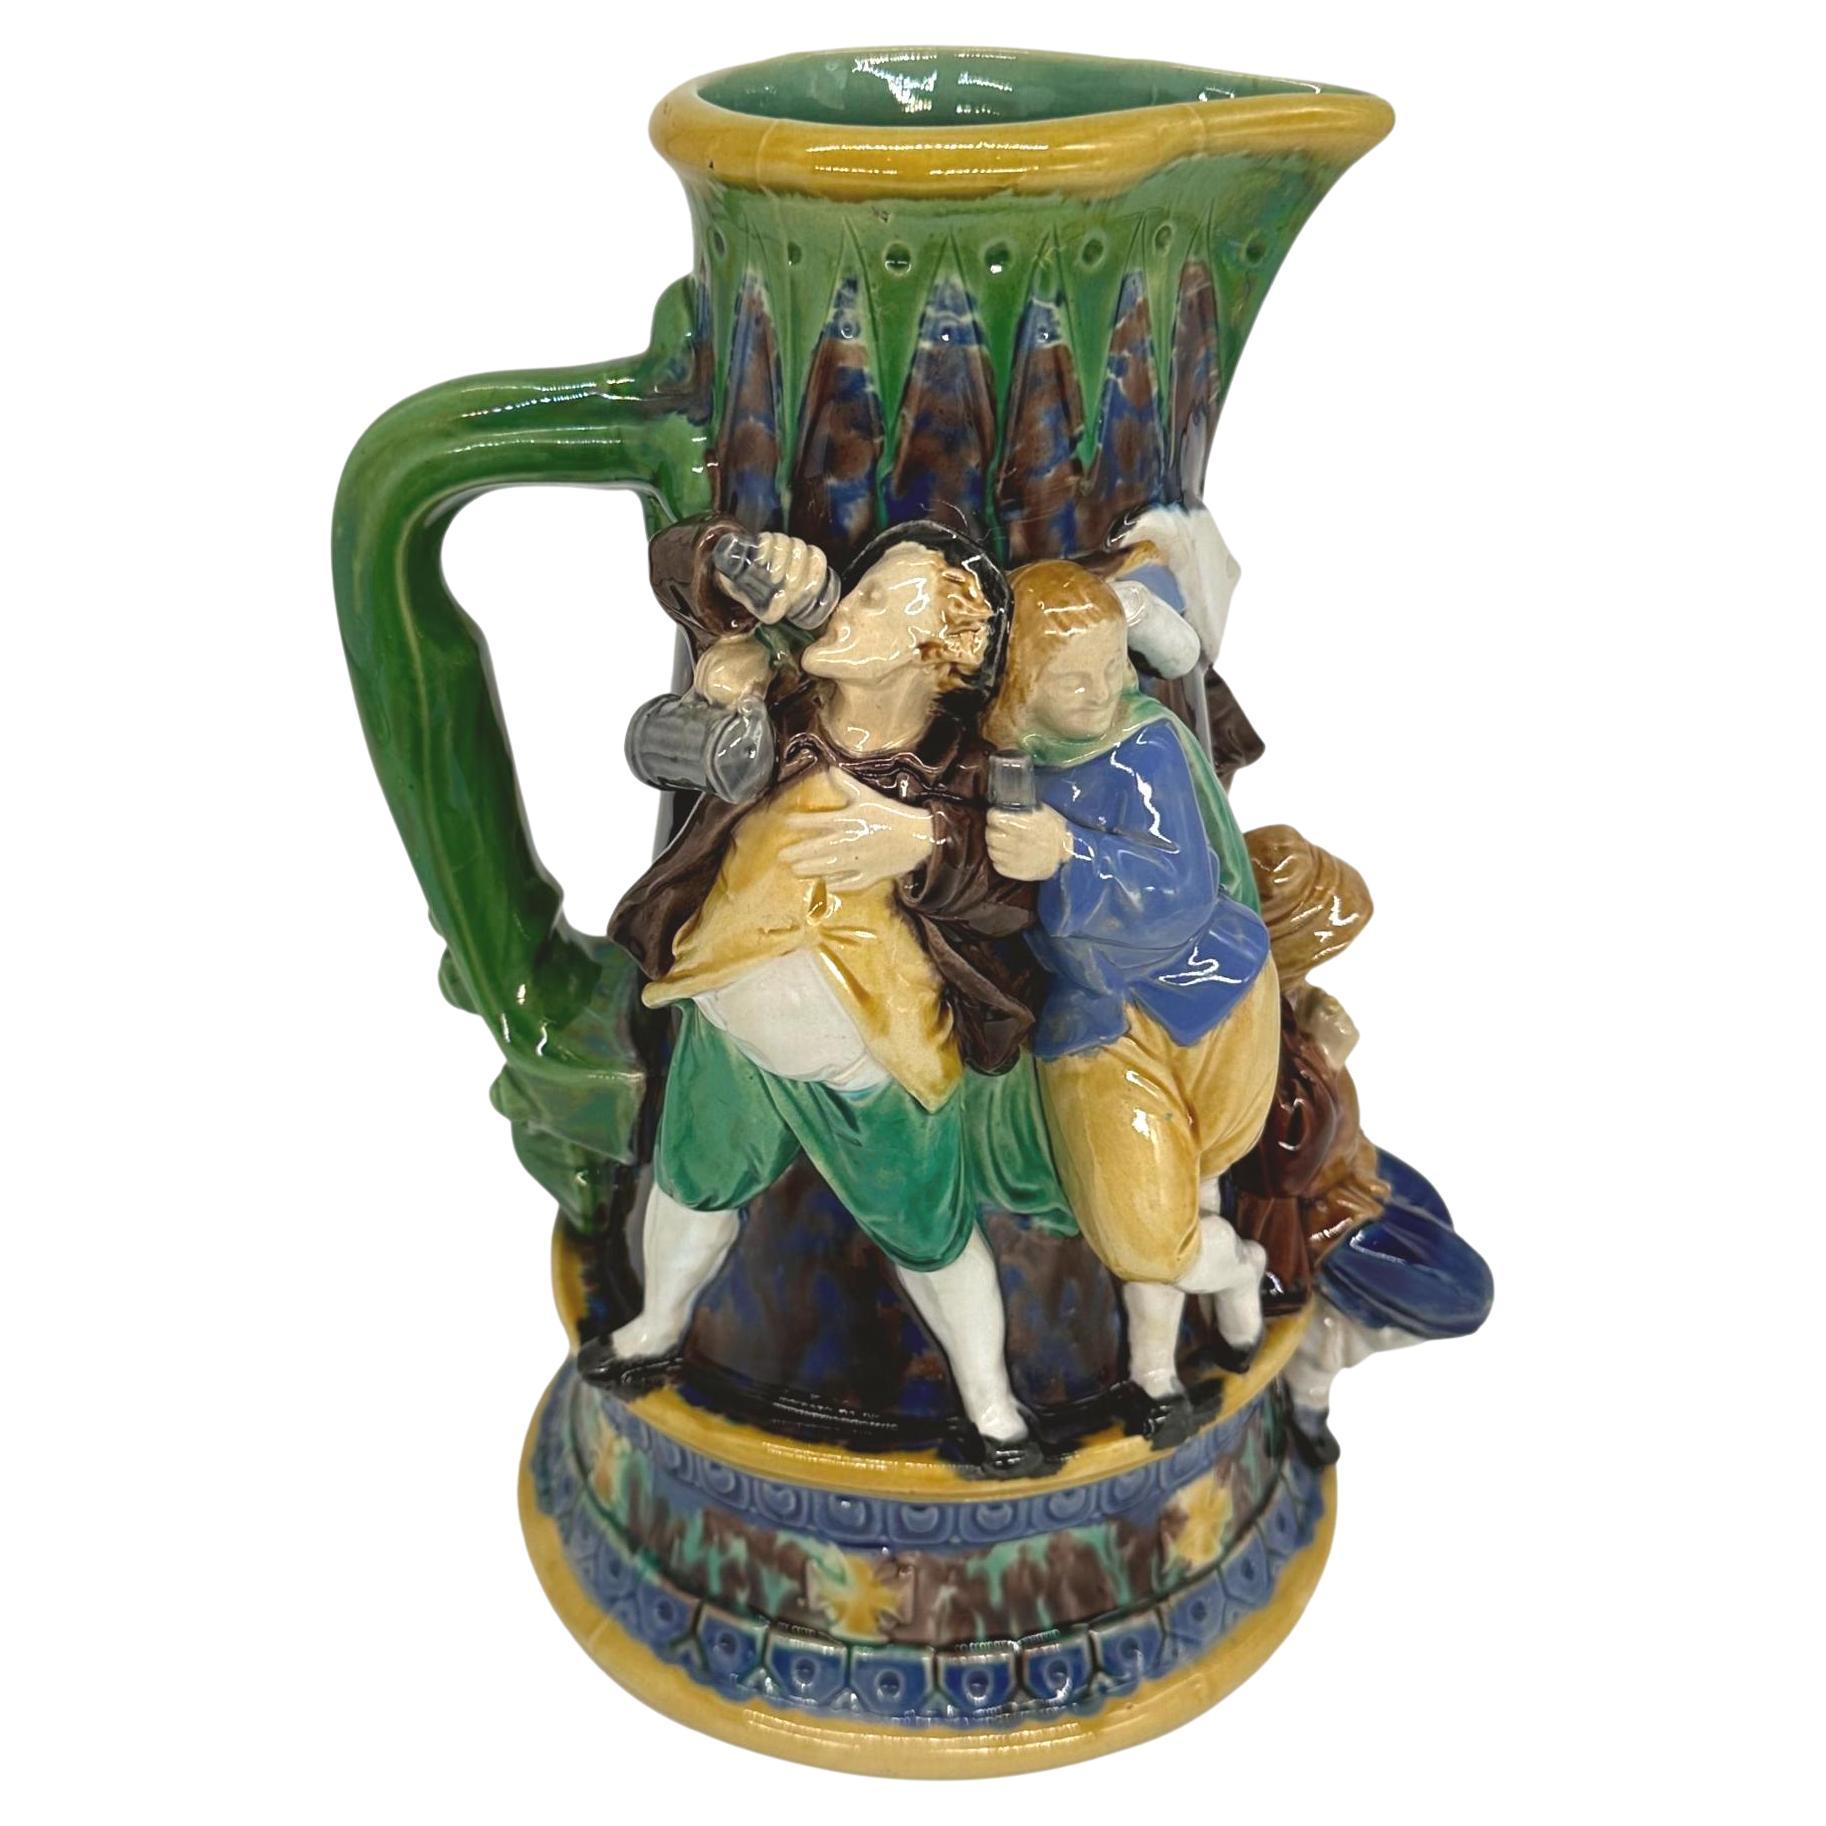 A Minton Majolica Ale Jug with Five Revelers in Medieval Dress, dated 1862 For Sale